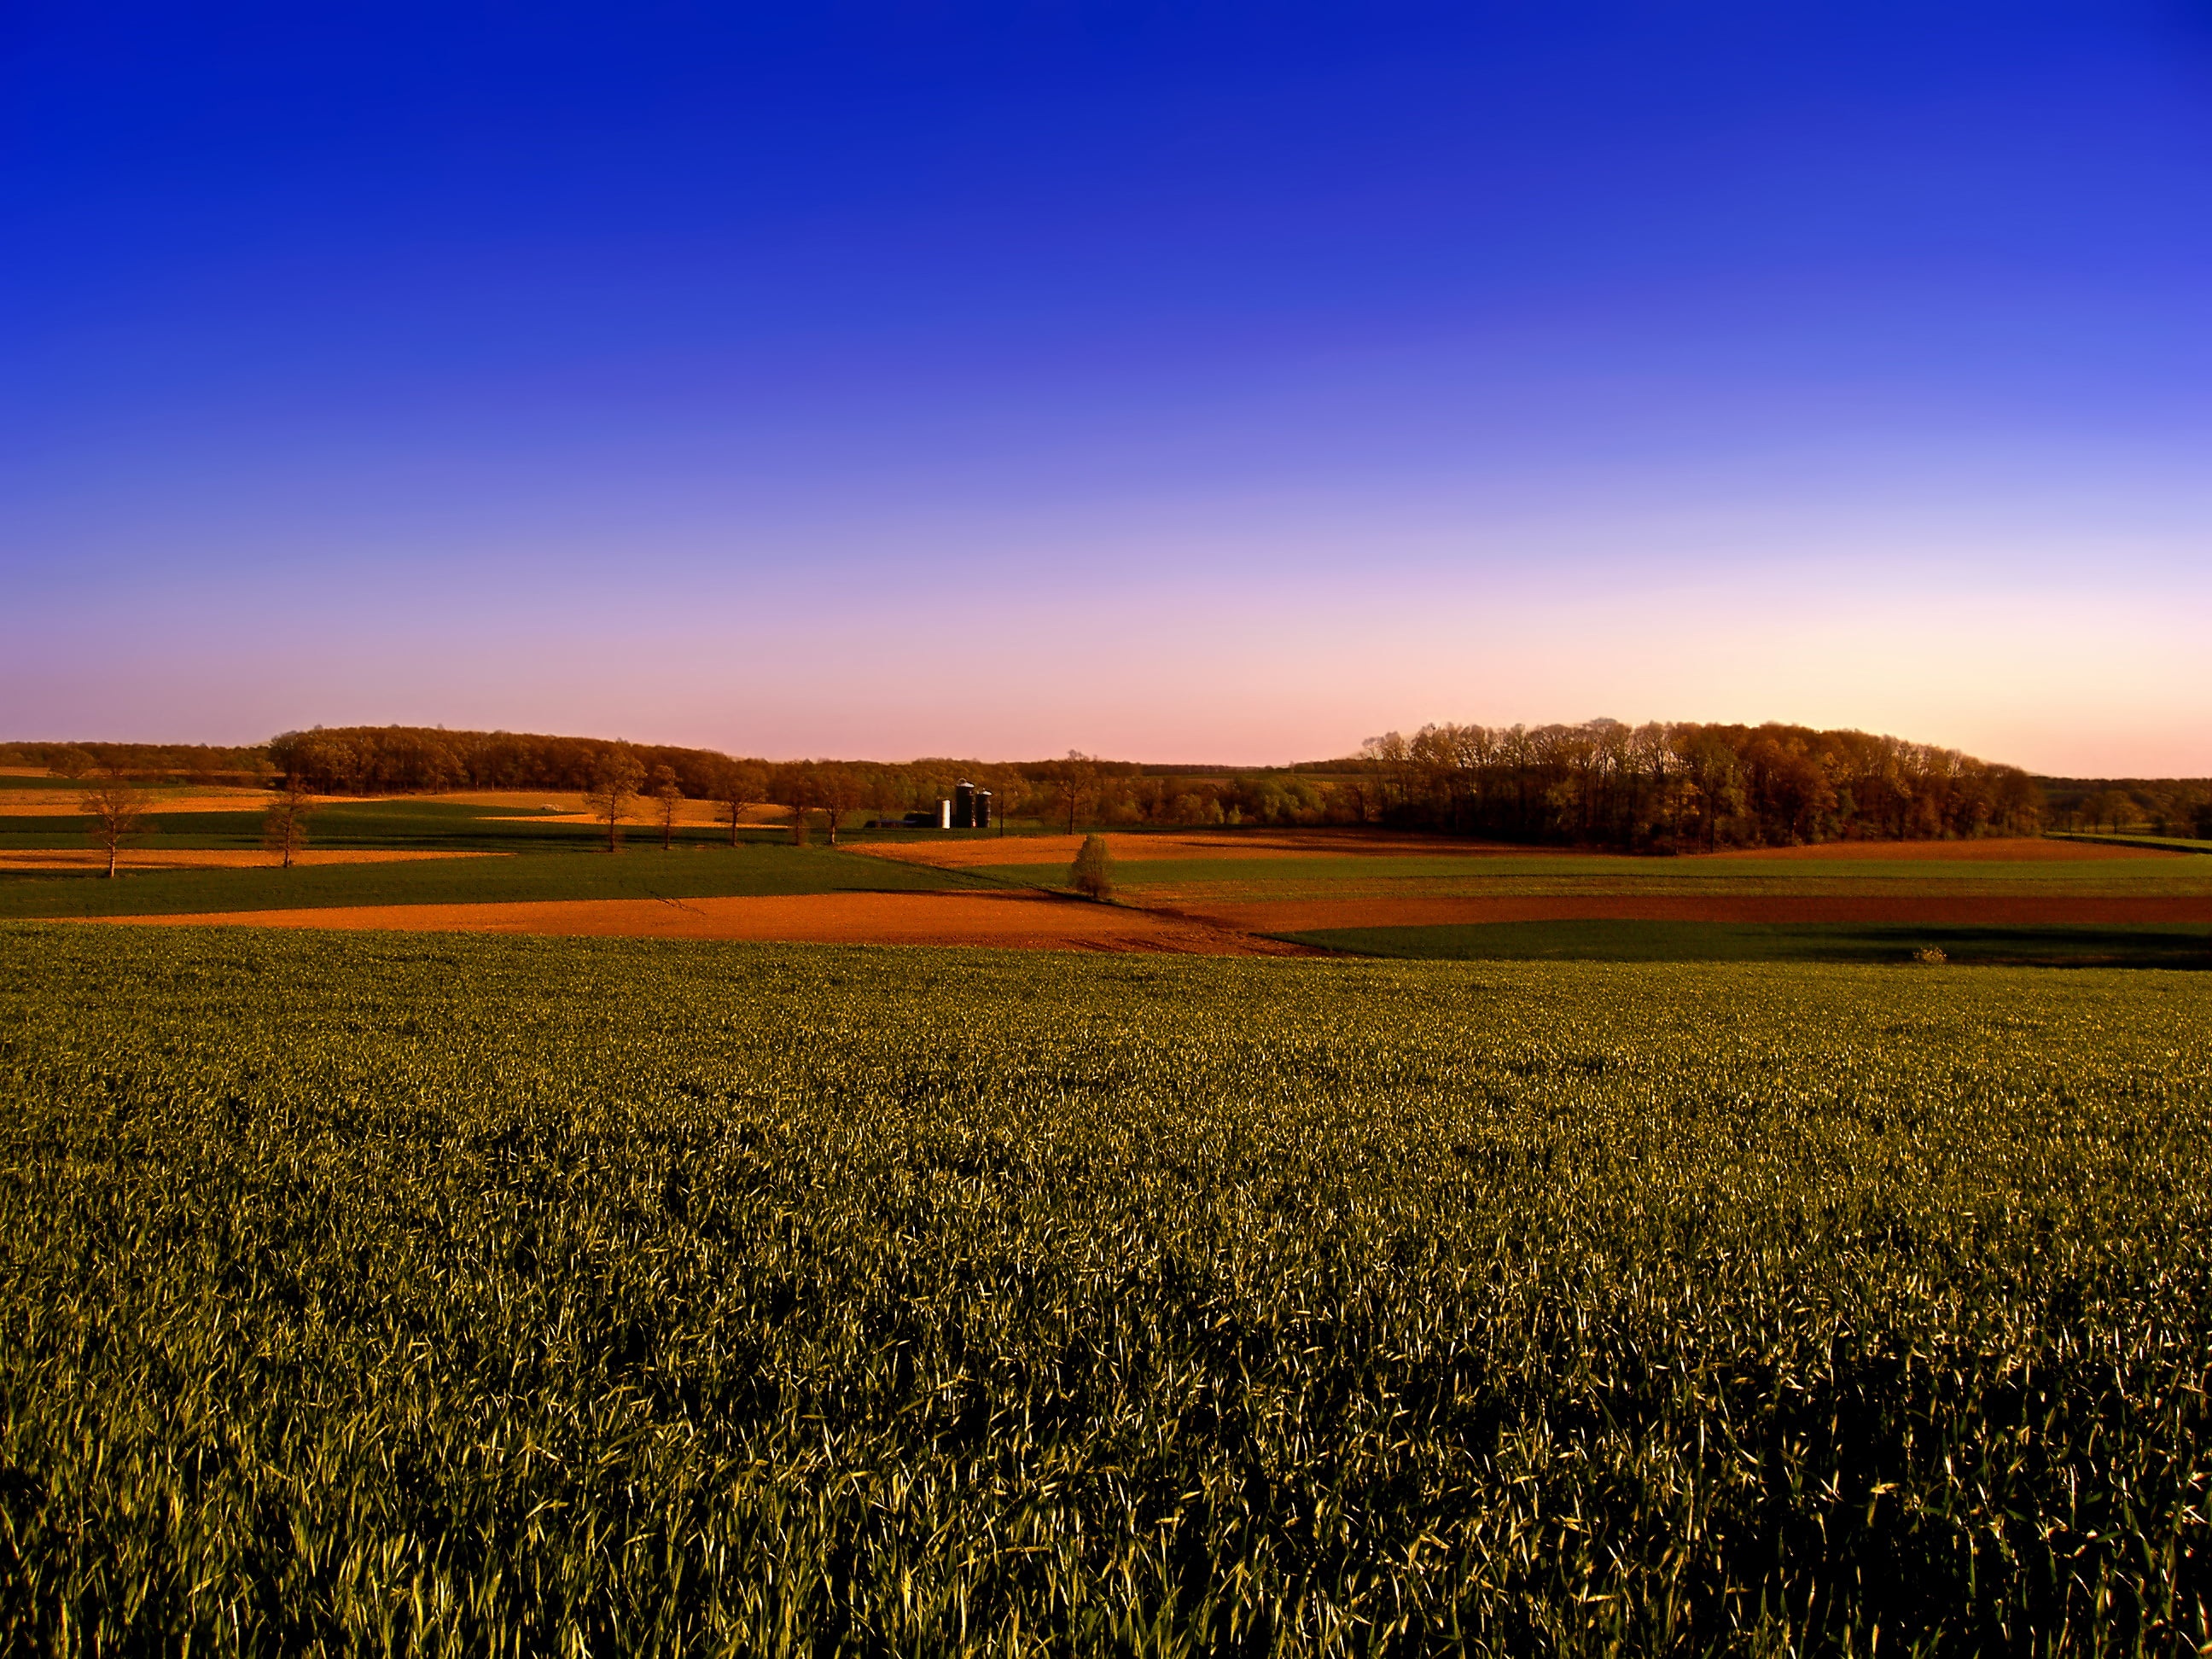 Landscape Photography Of Field With Trees During Daytime Hd Wallpaper